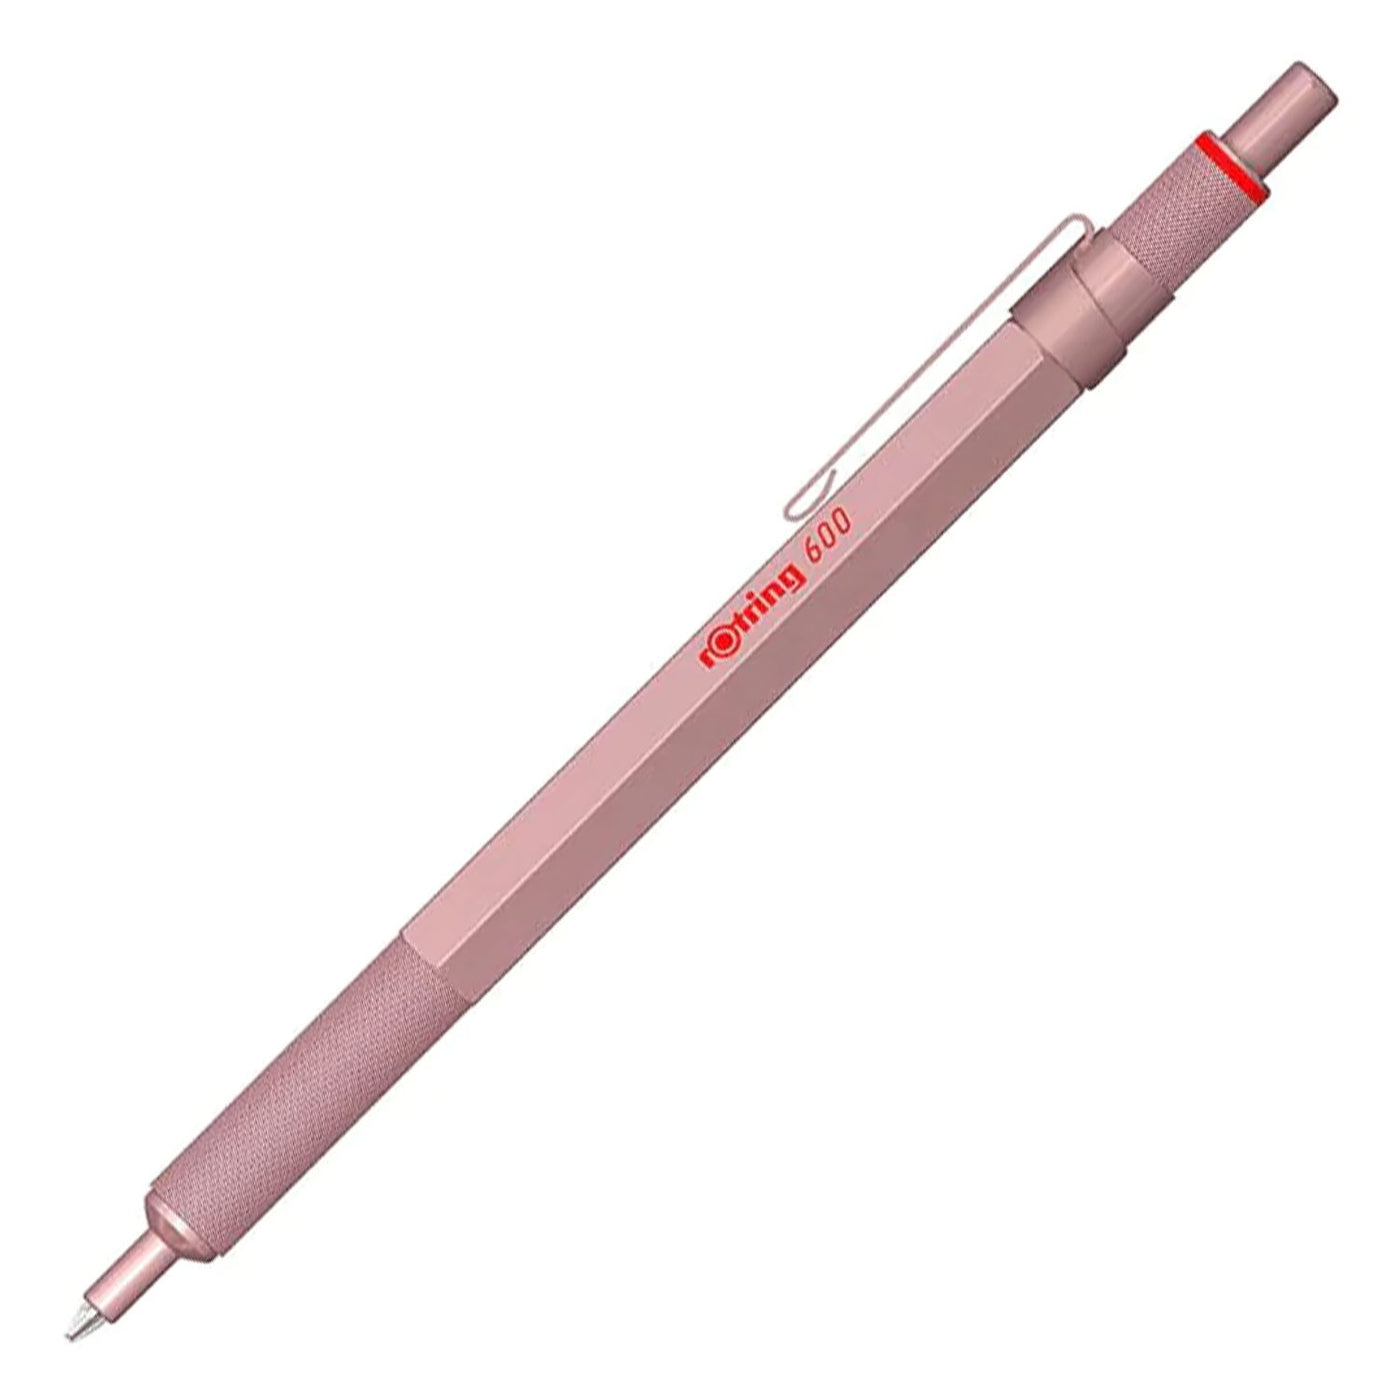  Rotring 600 Metallic Ballpoint Pen Medium Point Black Ink Rose  Gold Barrel Refillable 1 Count : Office Products